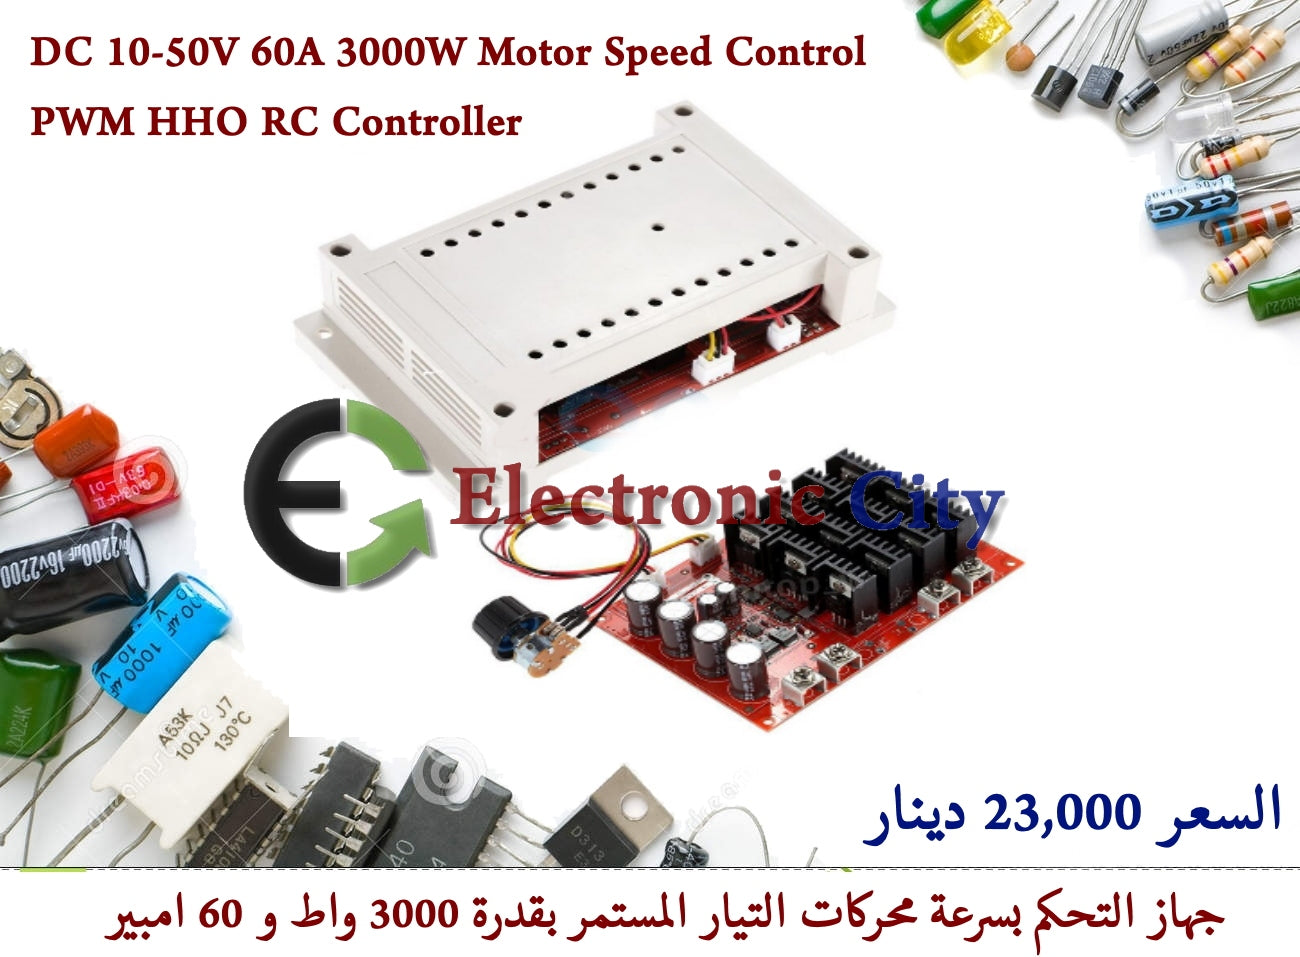 DC 10-50V 60A 3000W Motor Speed Control PWM HHO RC Controller  #O2 010836